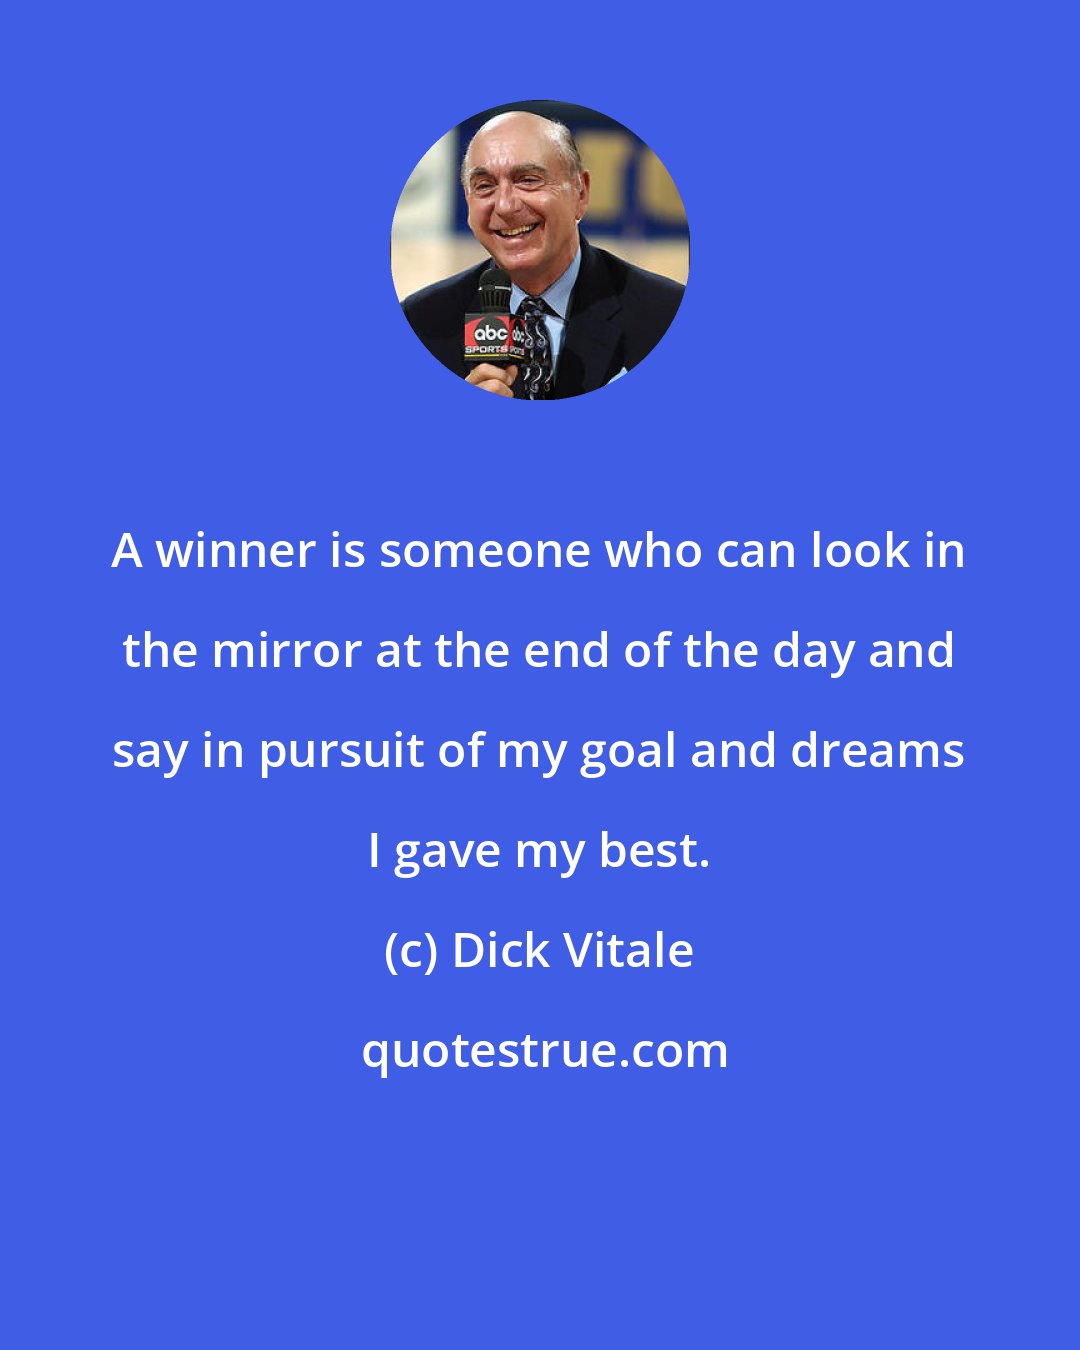 Dick Vitale: A winner is someone who can look in the mirror at the end of the day and say in pursuit of my goal and dreams I gave my best.